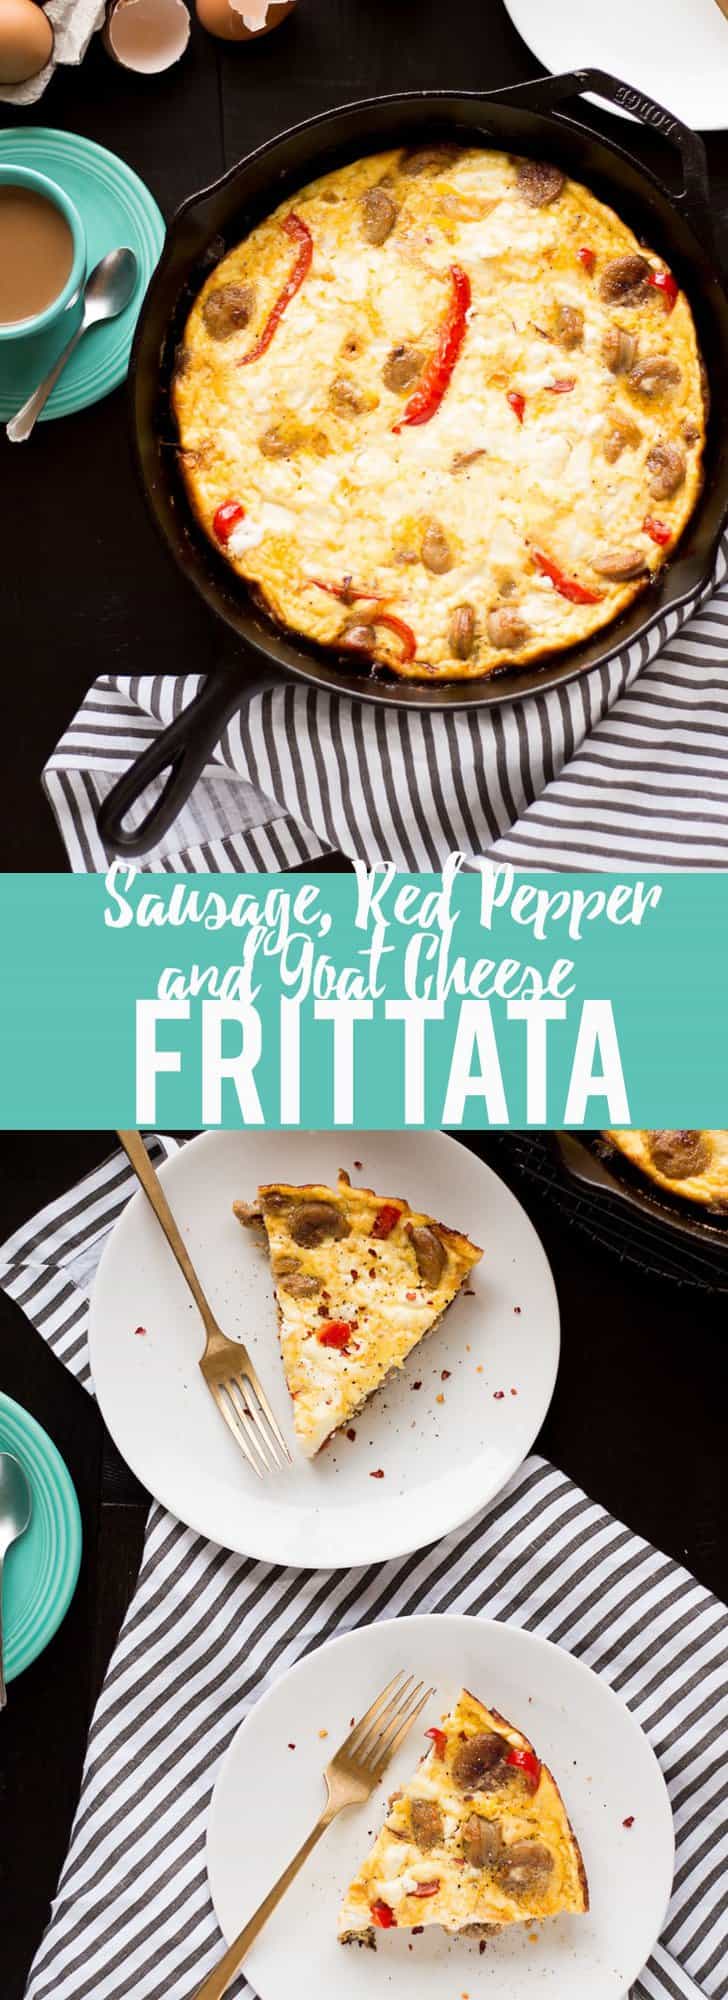 This Sausage, Red Pepper and Goat Cheese Frittata makes an easy, one pan dinner or breezy brunch. High protein, low carb, gluten free and easy to make! #sponsored